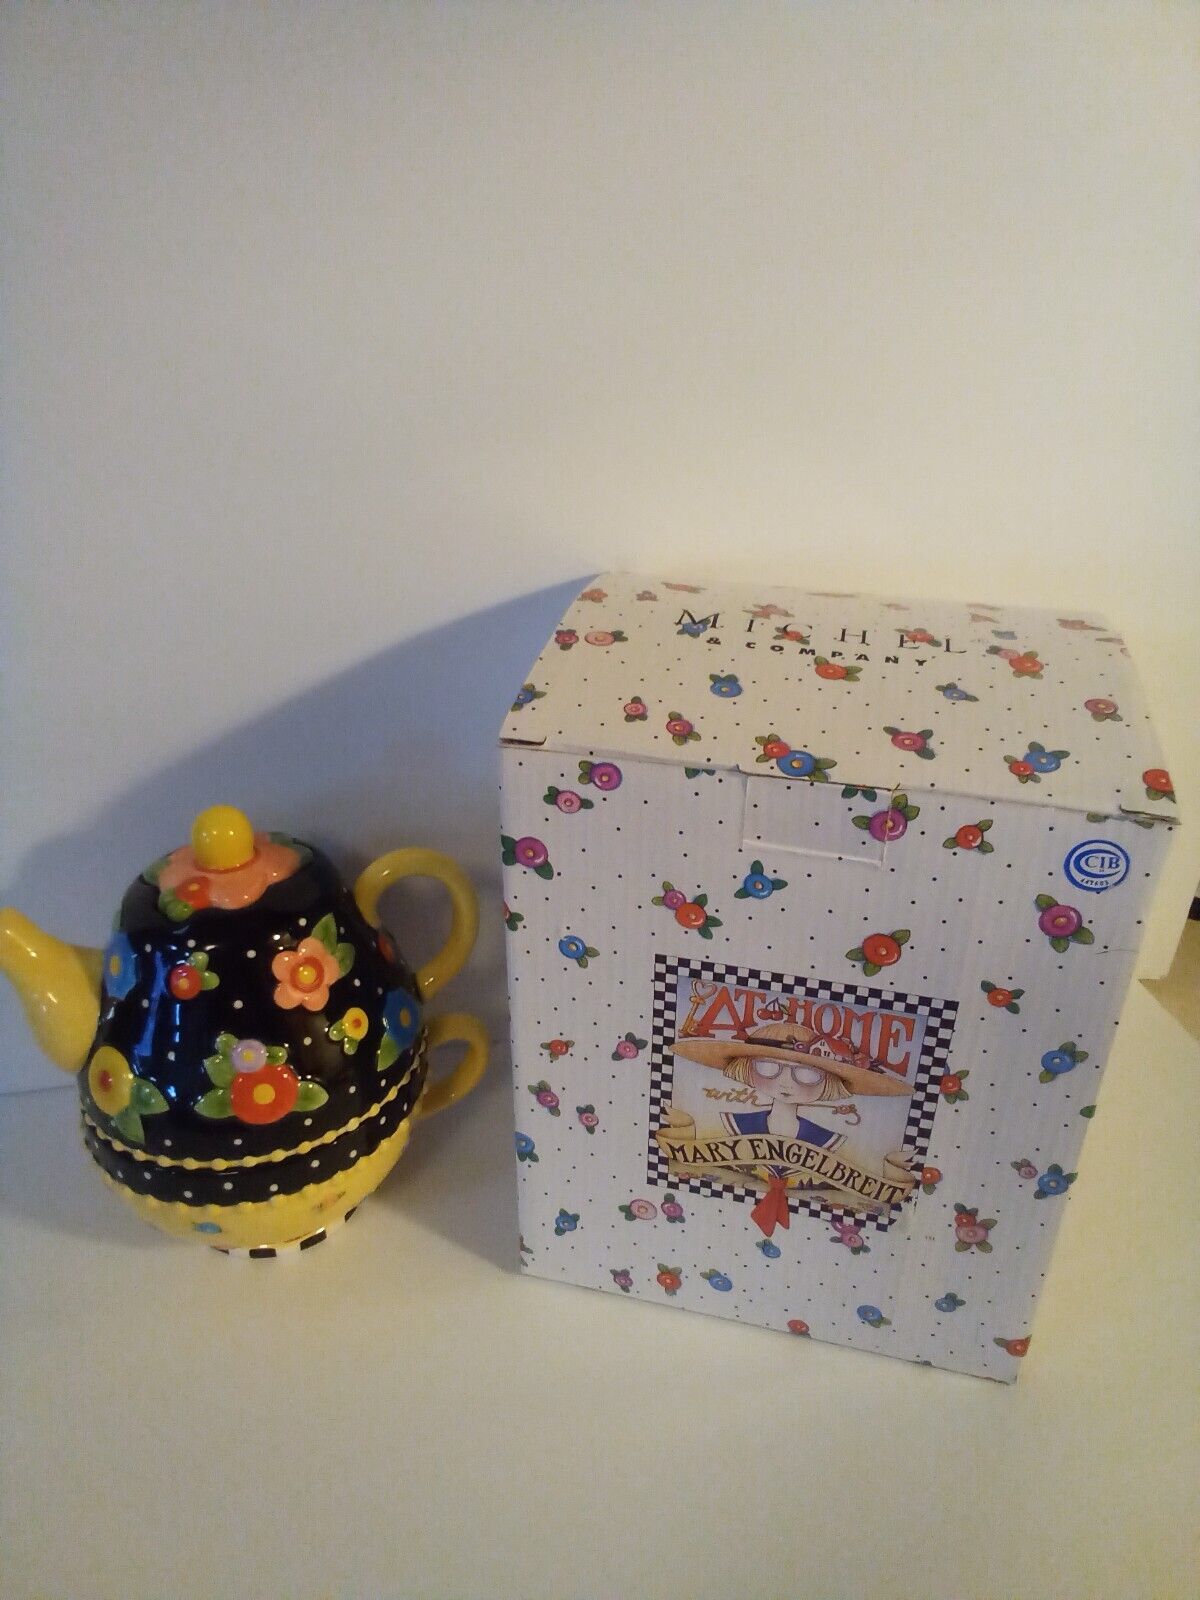 New W Box 2001 Mary Engelbreit 3D Decorative Collectibles Ceramic Teapot and Cup